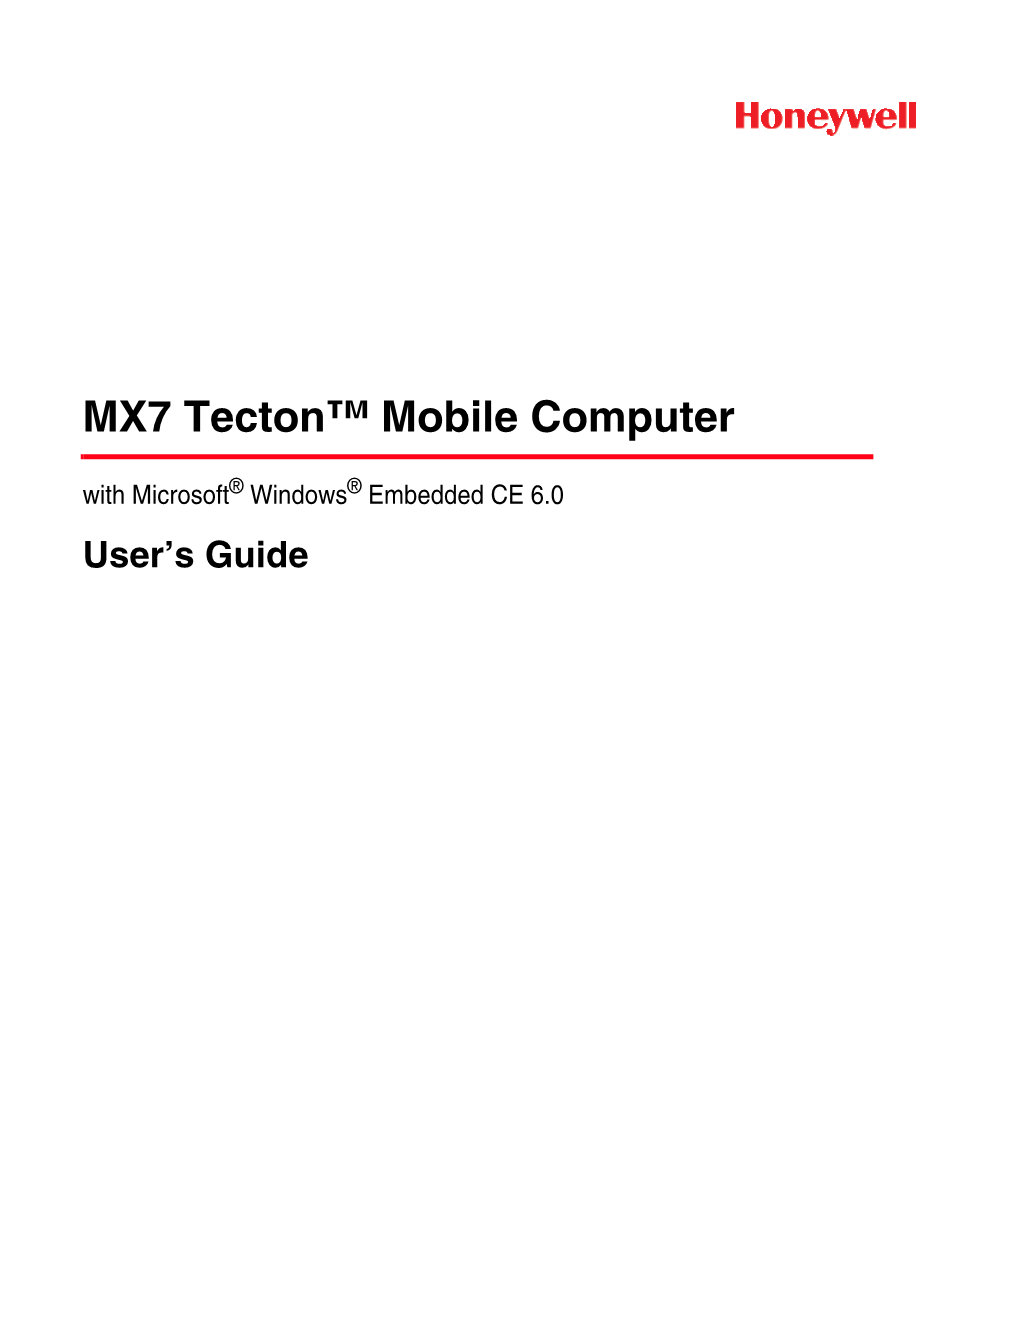 MX7 Tecton User's Guide with Microsoft Windows Embedded CE